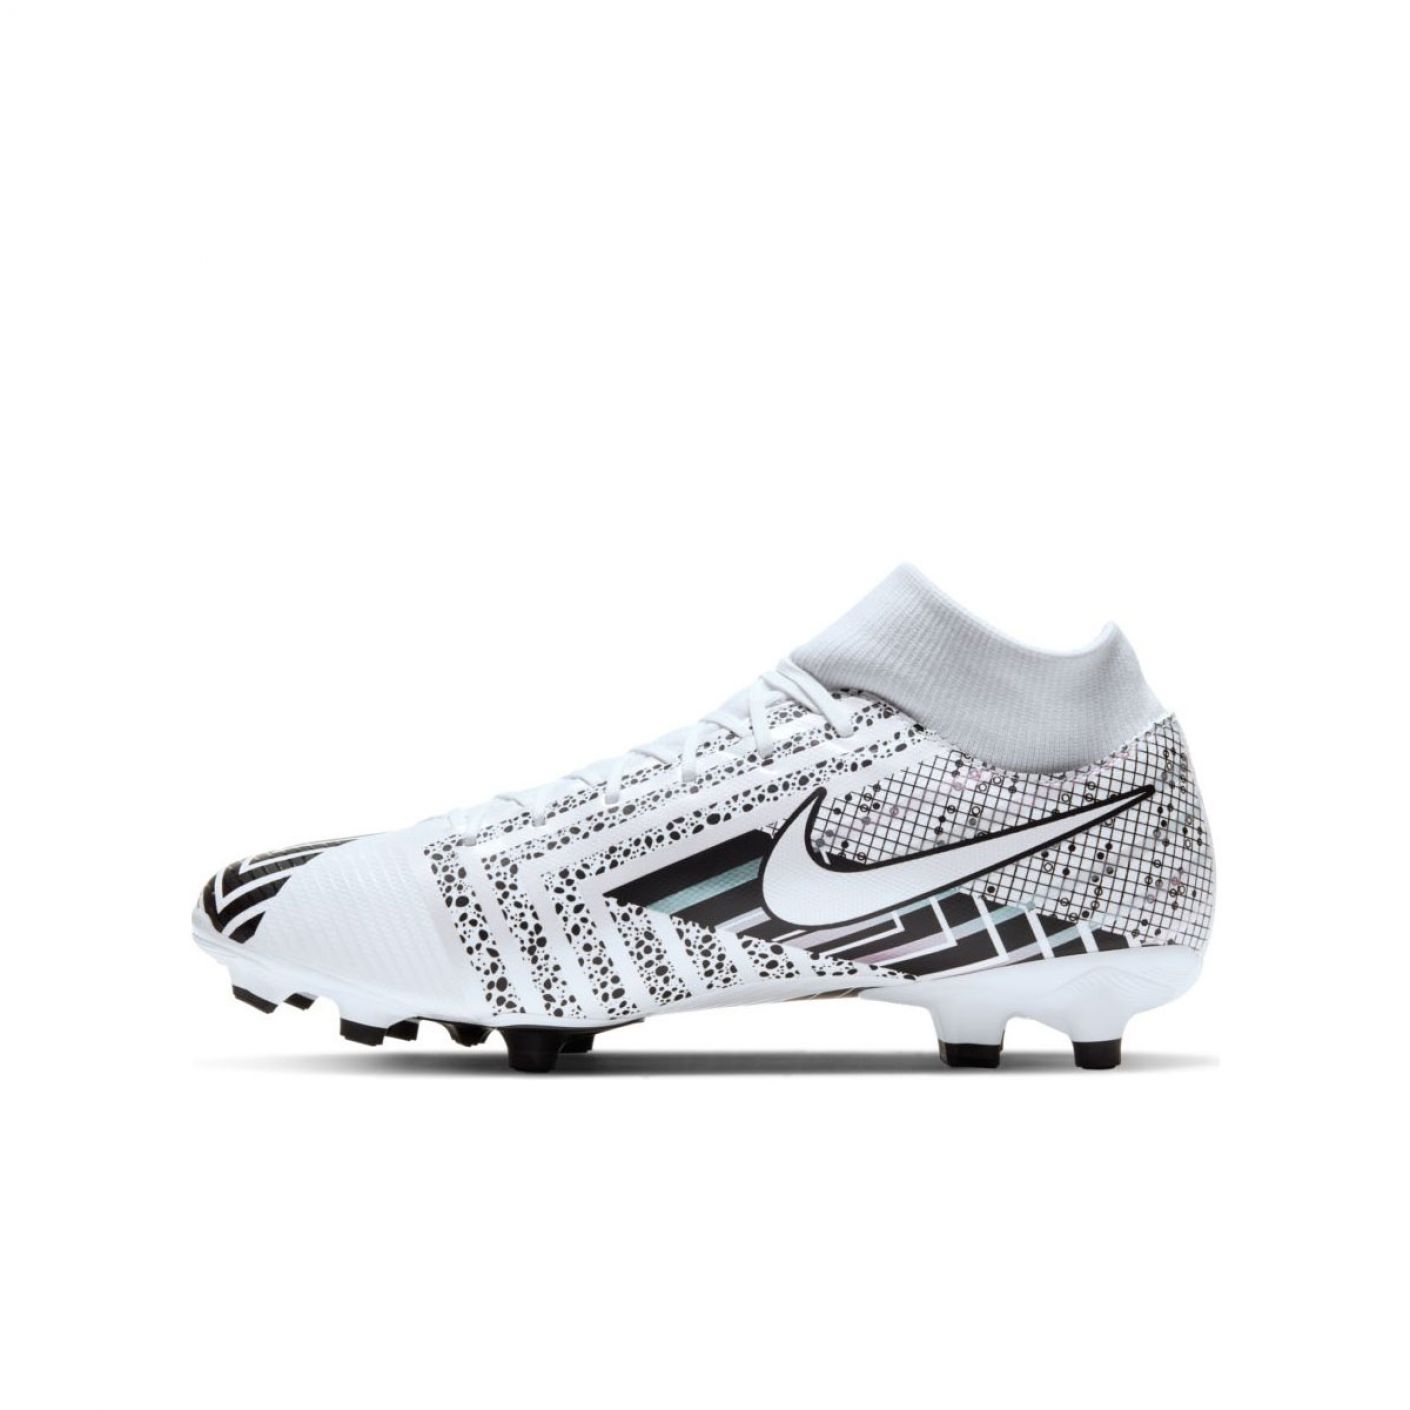 Nike Mercurial Superfly 7 Academy MDS MG White Black